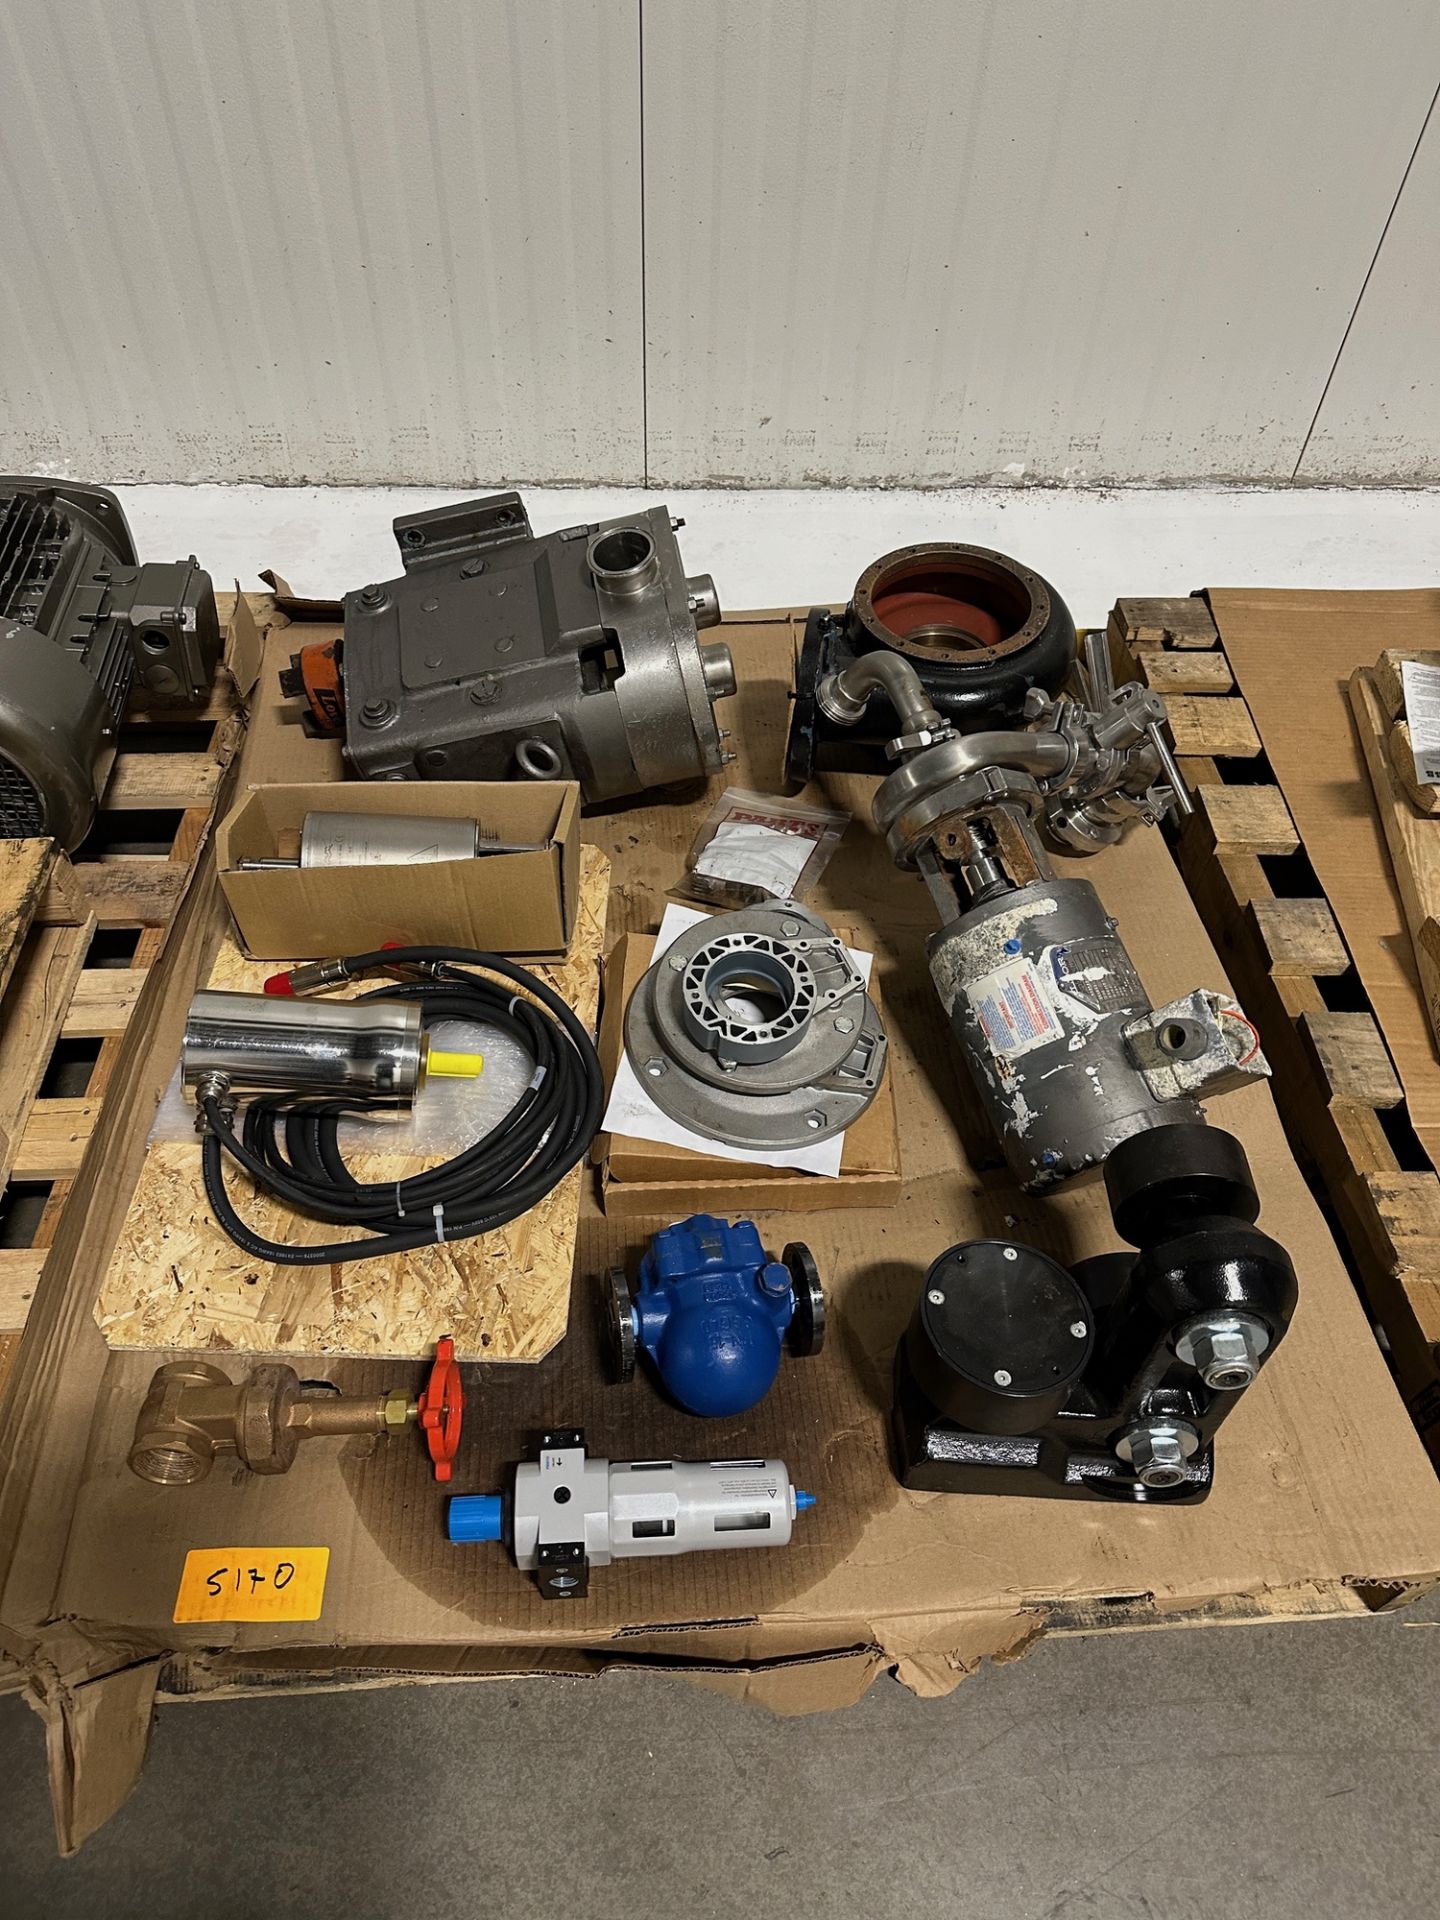 Pallet of Spare Motors, Pumps & Gear Boxes | Rig Fee $50